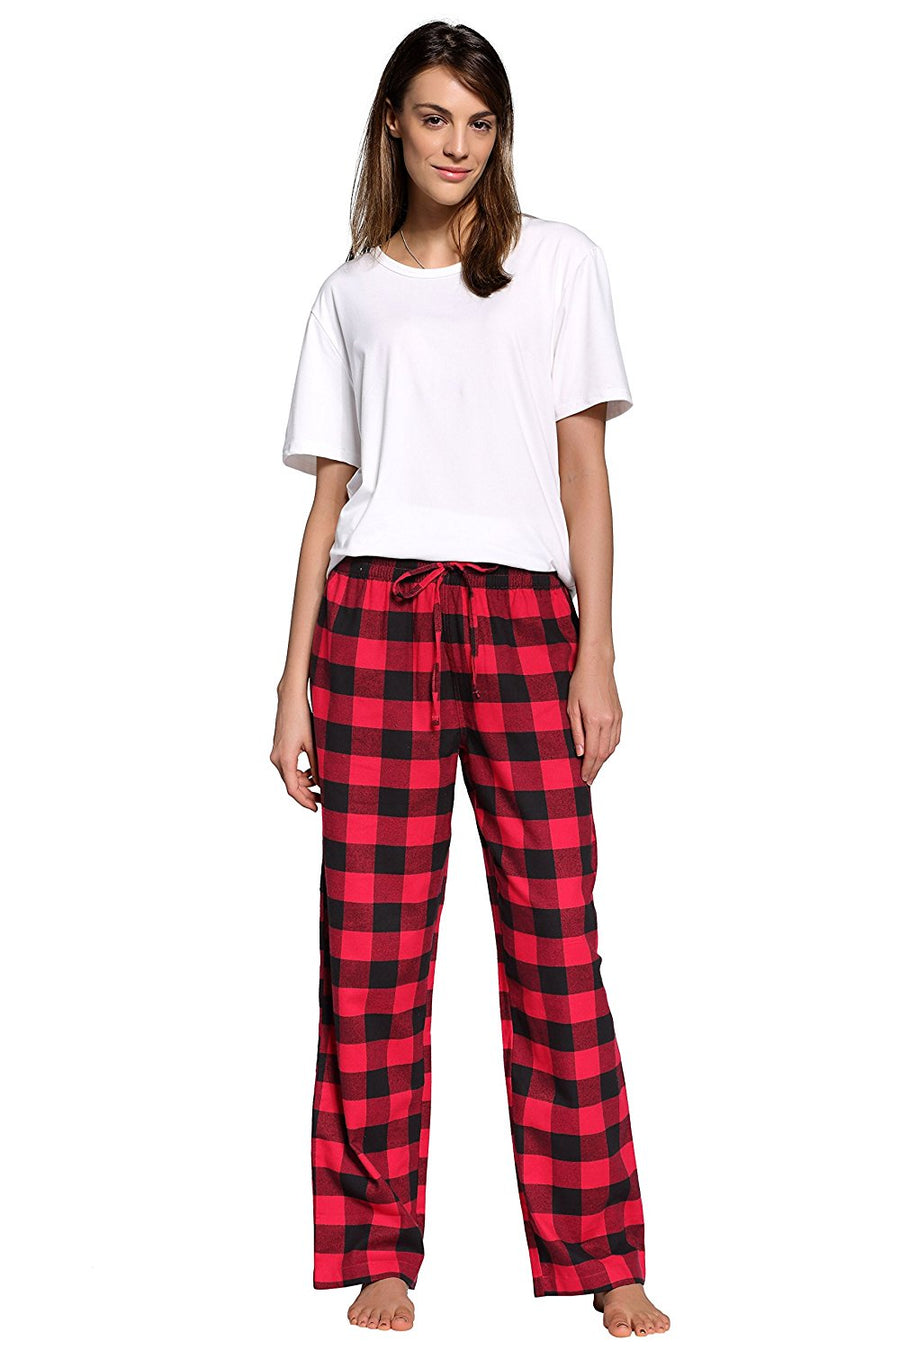 Buy CYZWomens Casual Stretch Cotton Pajama Pants Simple Lounge